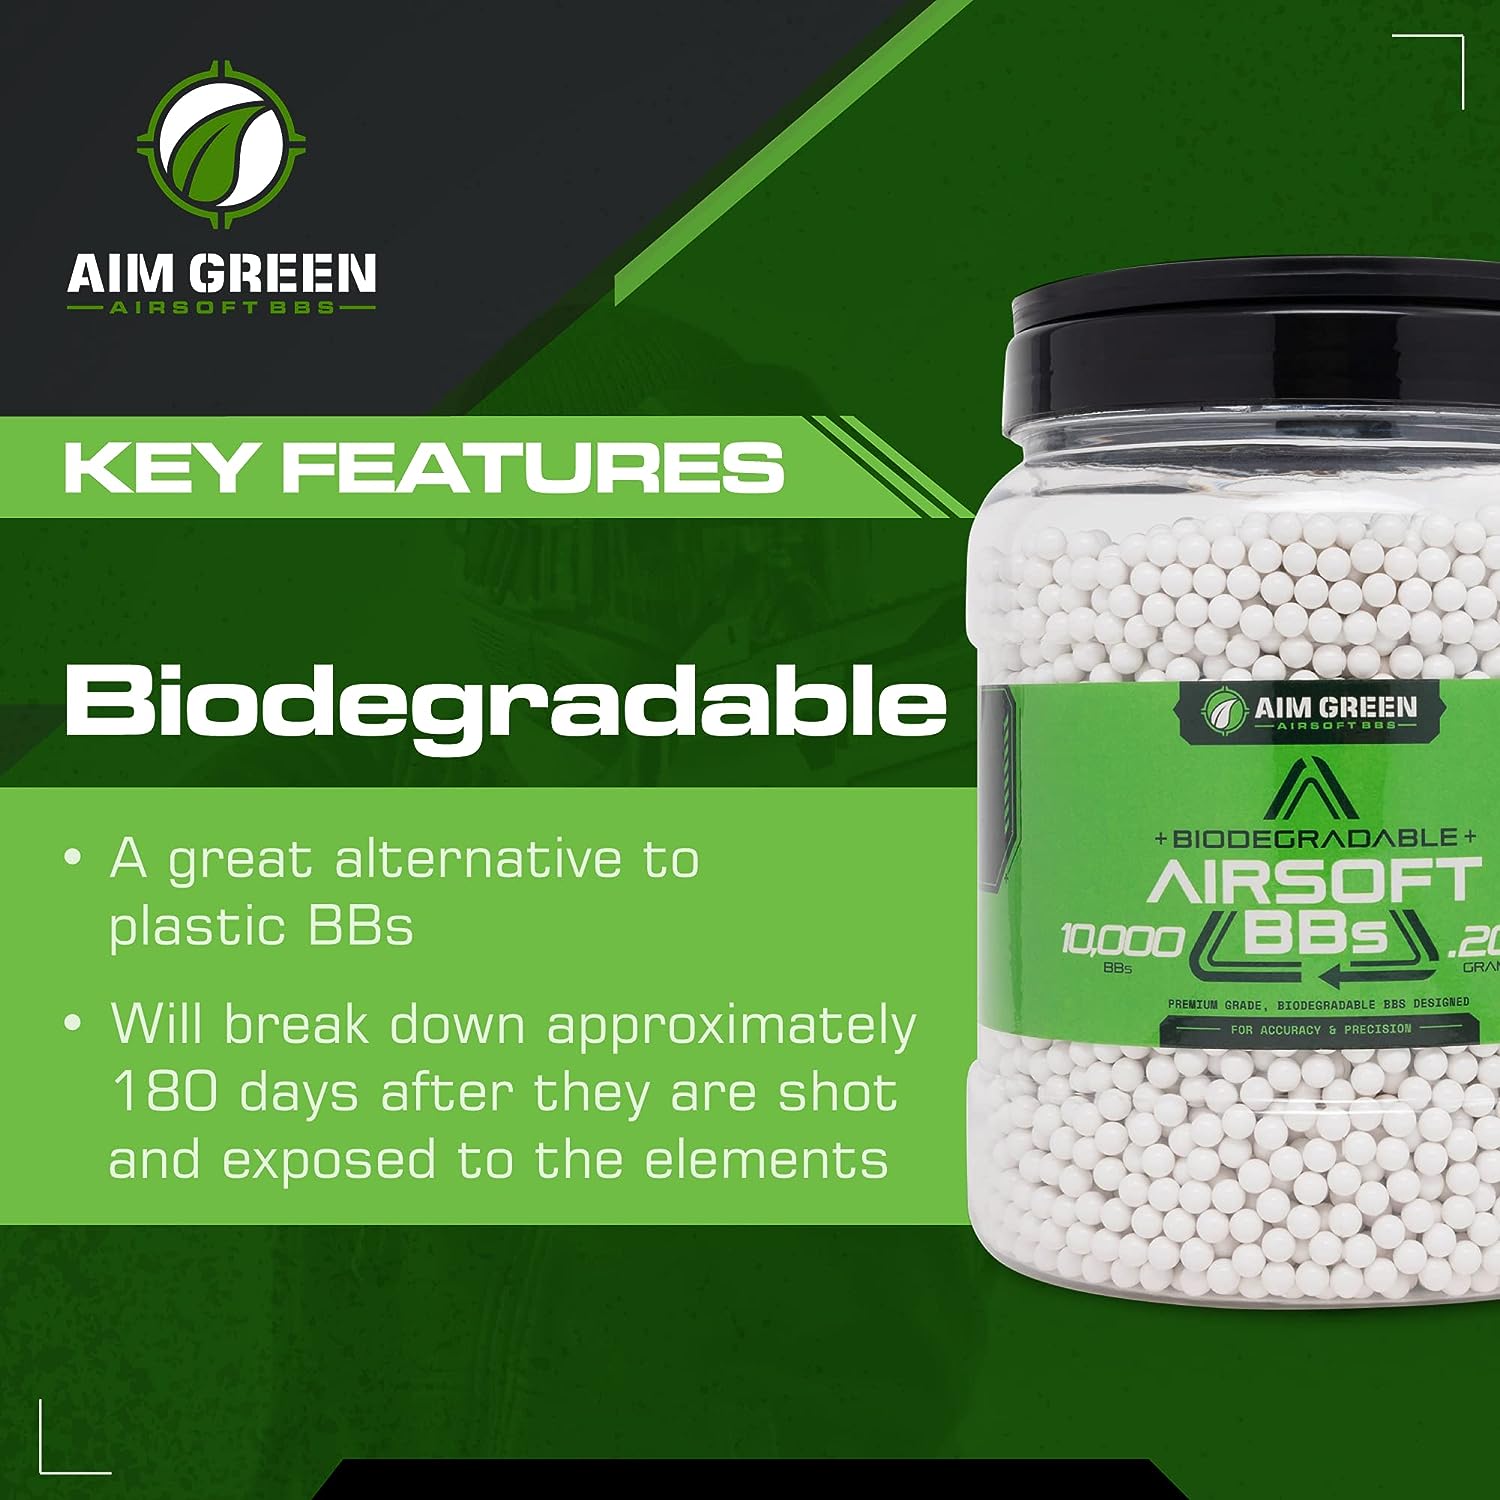 Aim Green Biodegradable Airsoft BBS Review